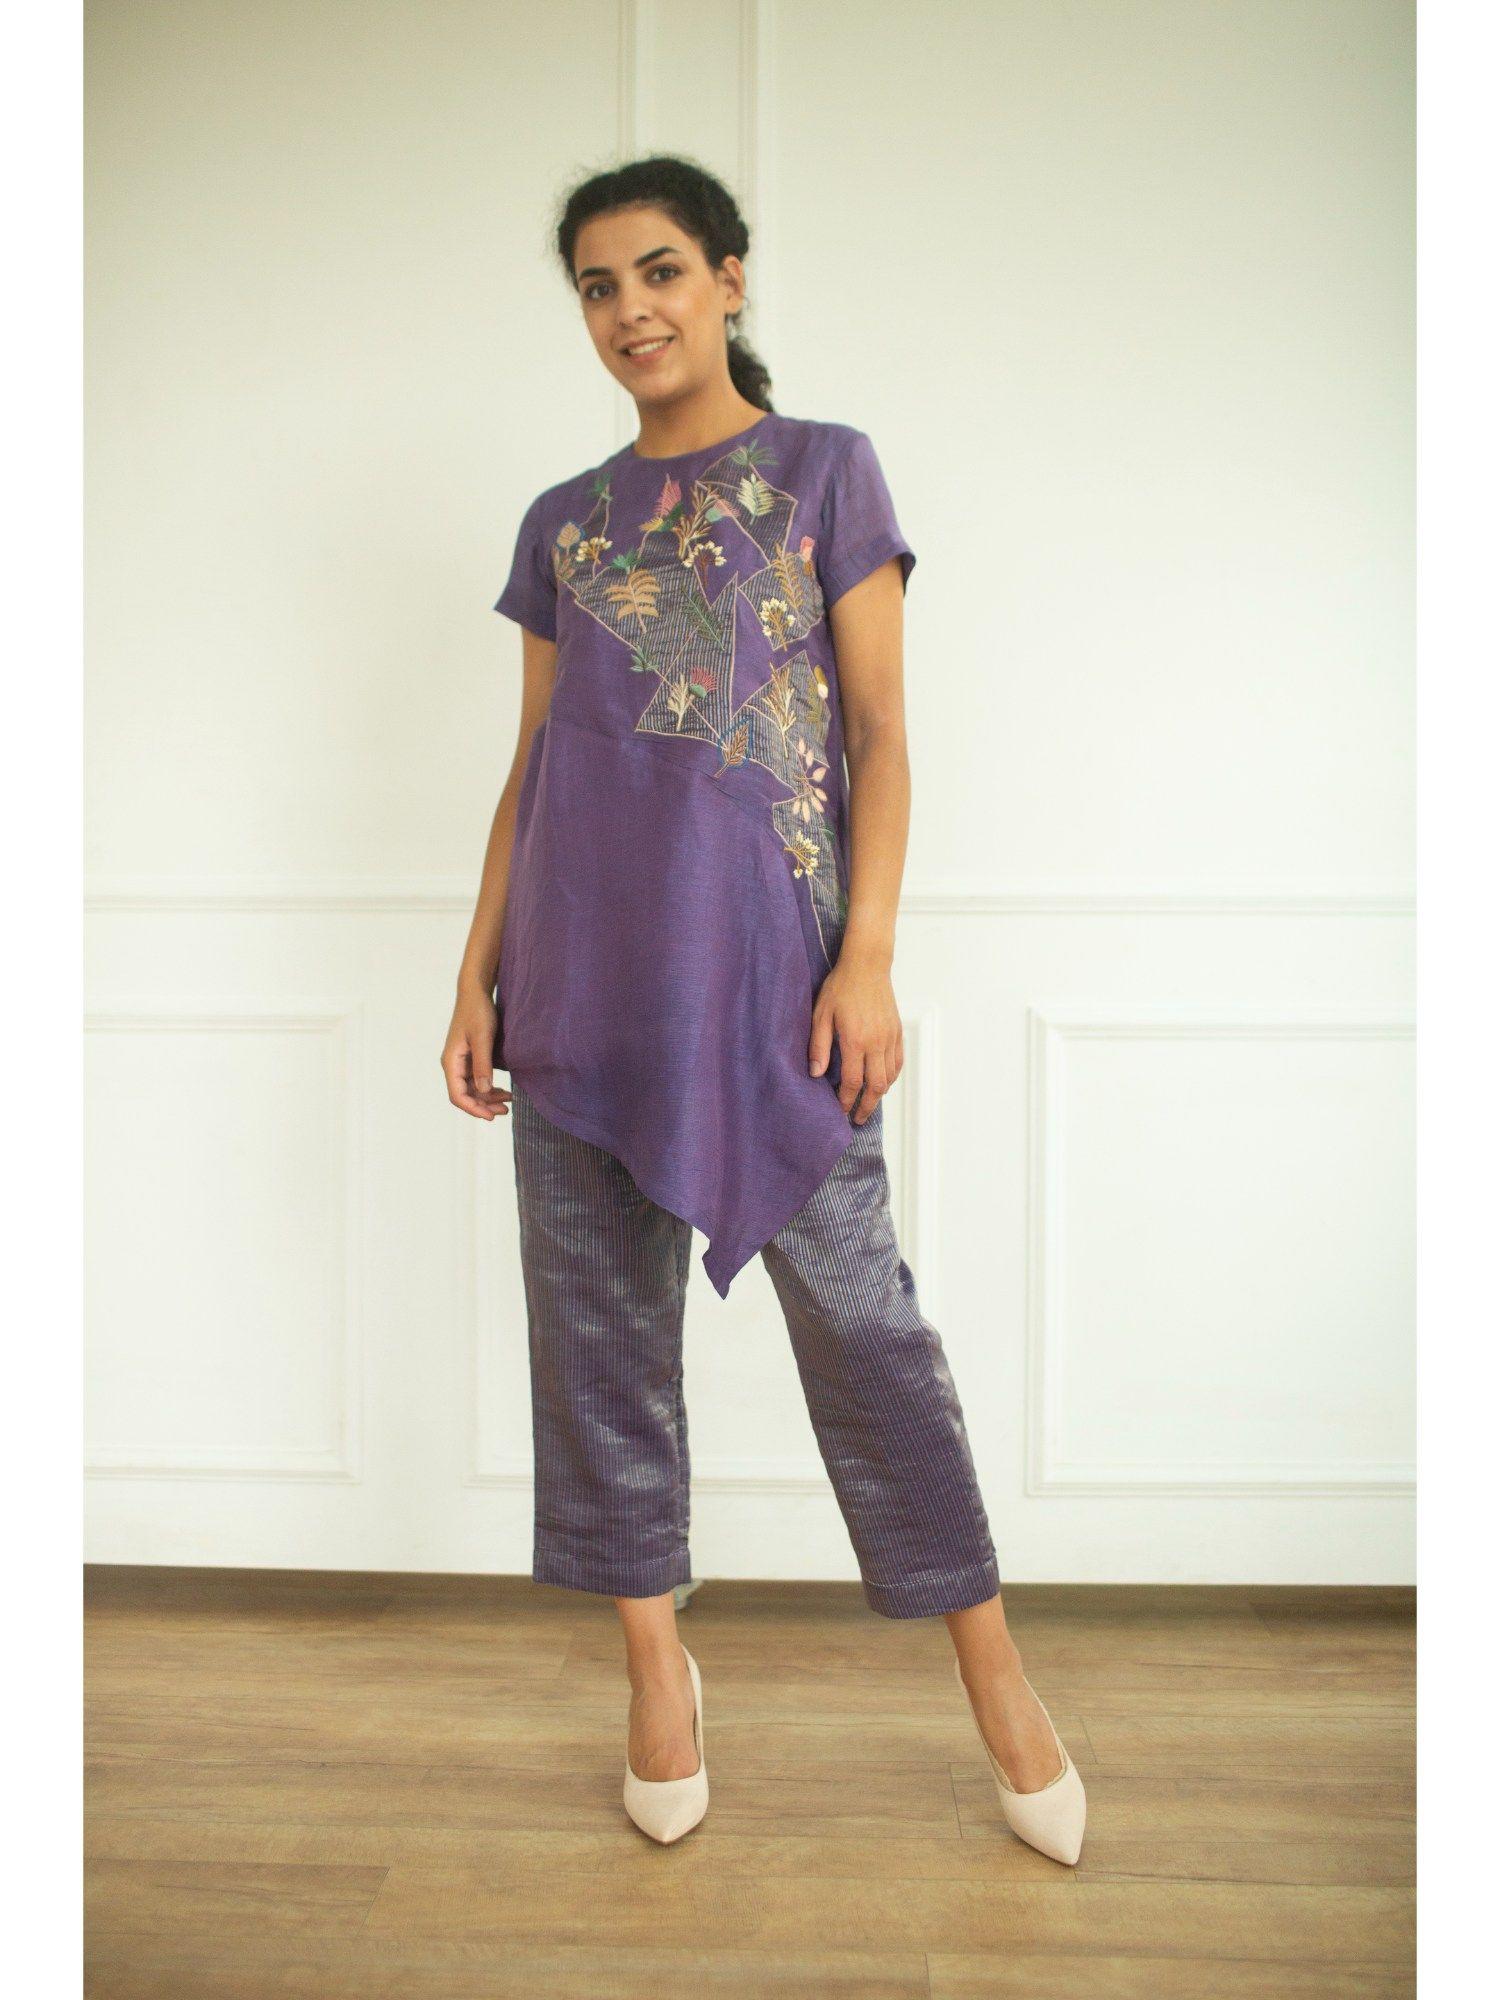 aurum plum tunic and pant co-ord (set of 2)